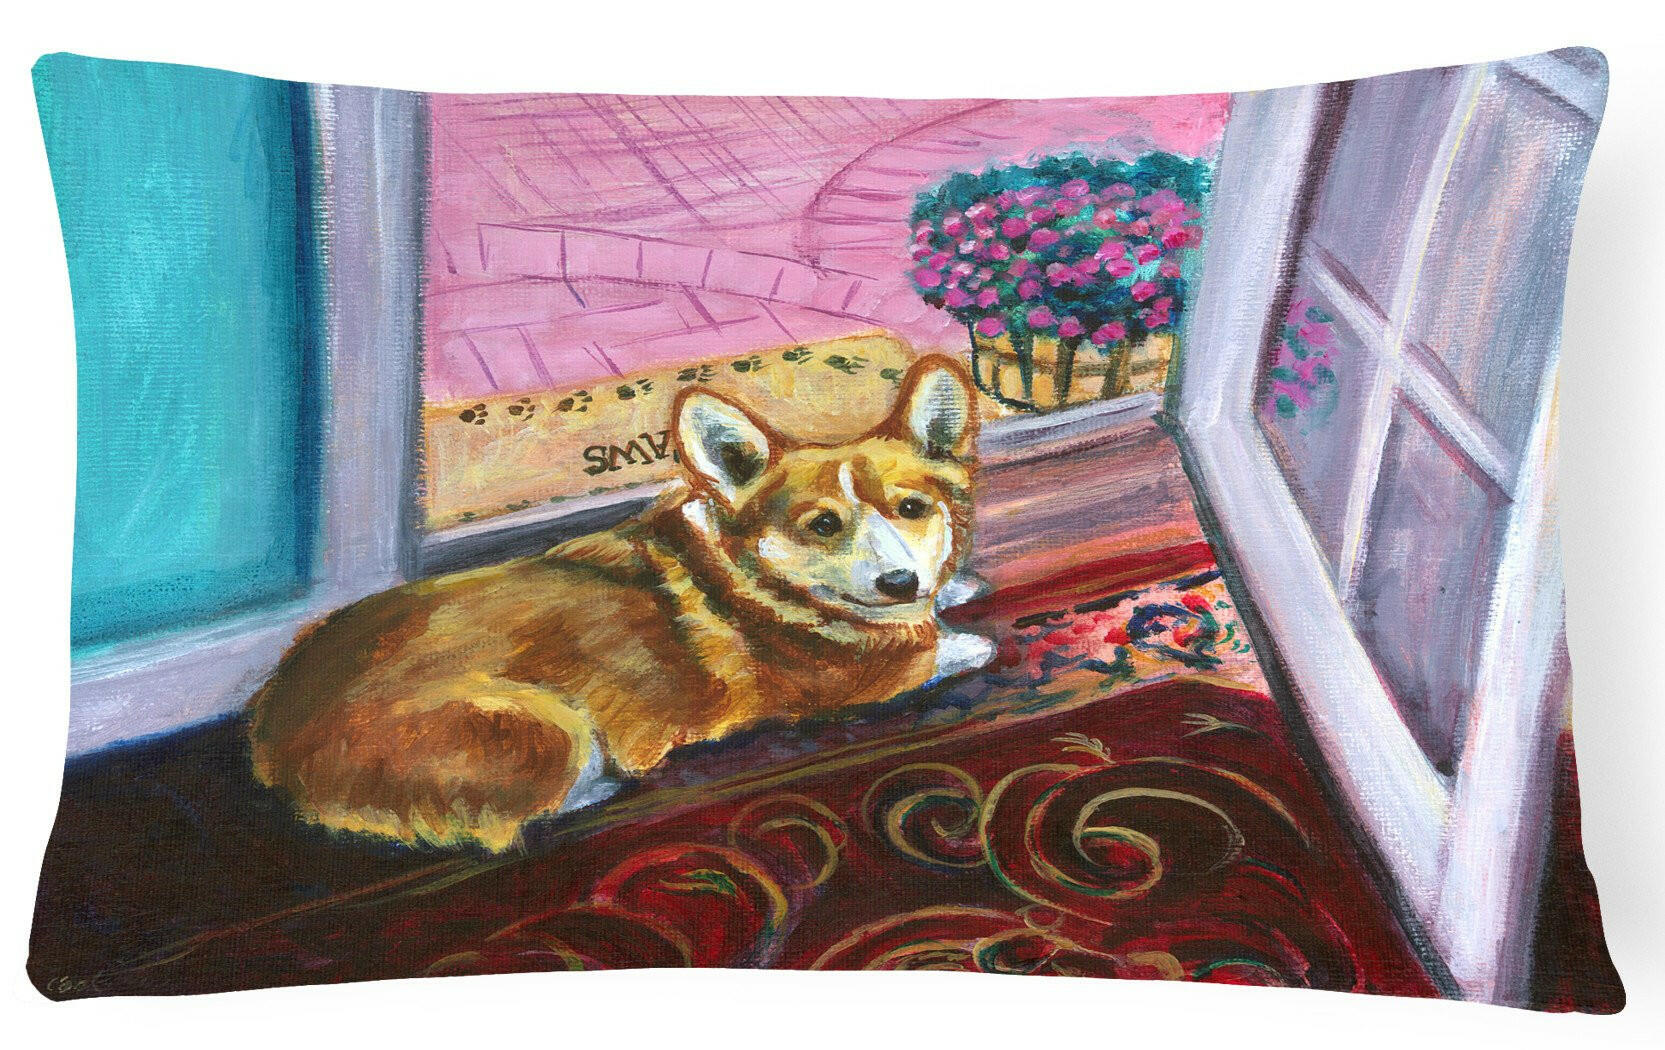 Corgi Watching from the Door Fabric Decorative Pillow 7410PW1216 by Caroline's Treasures